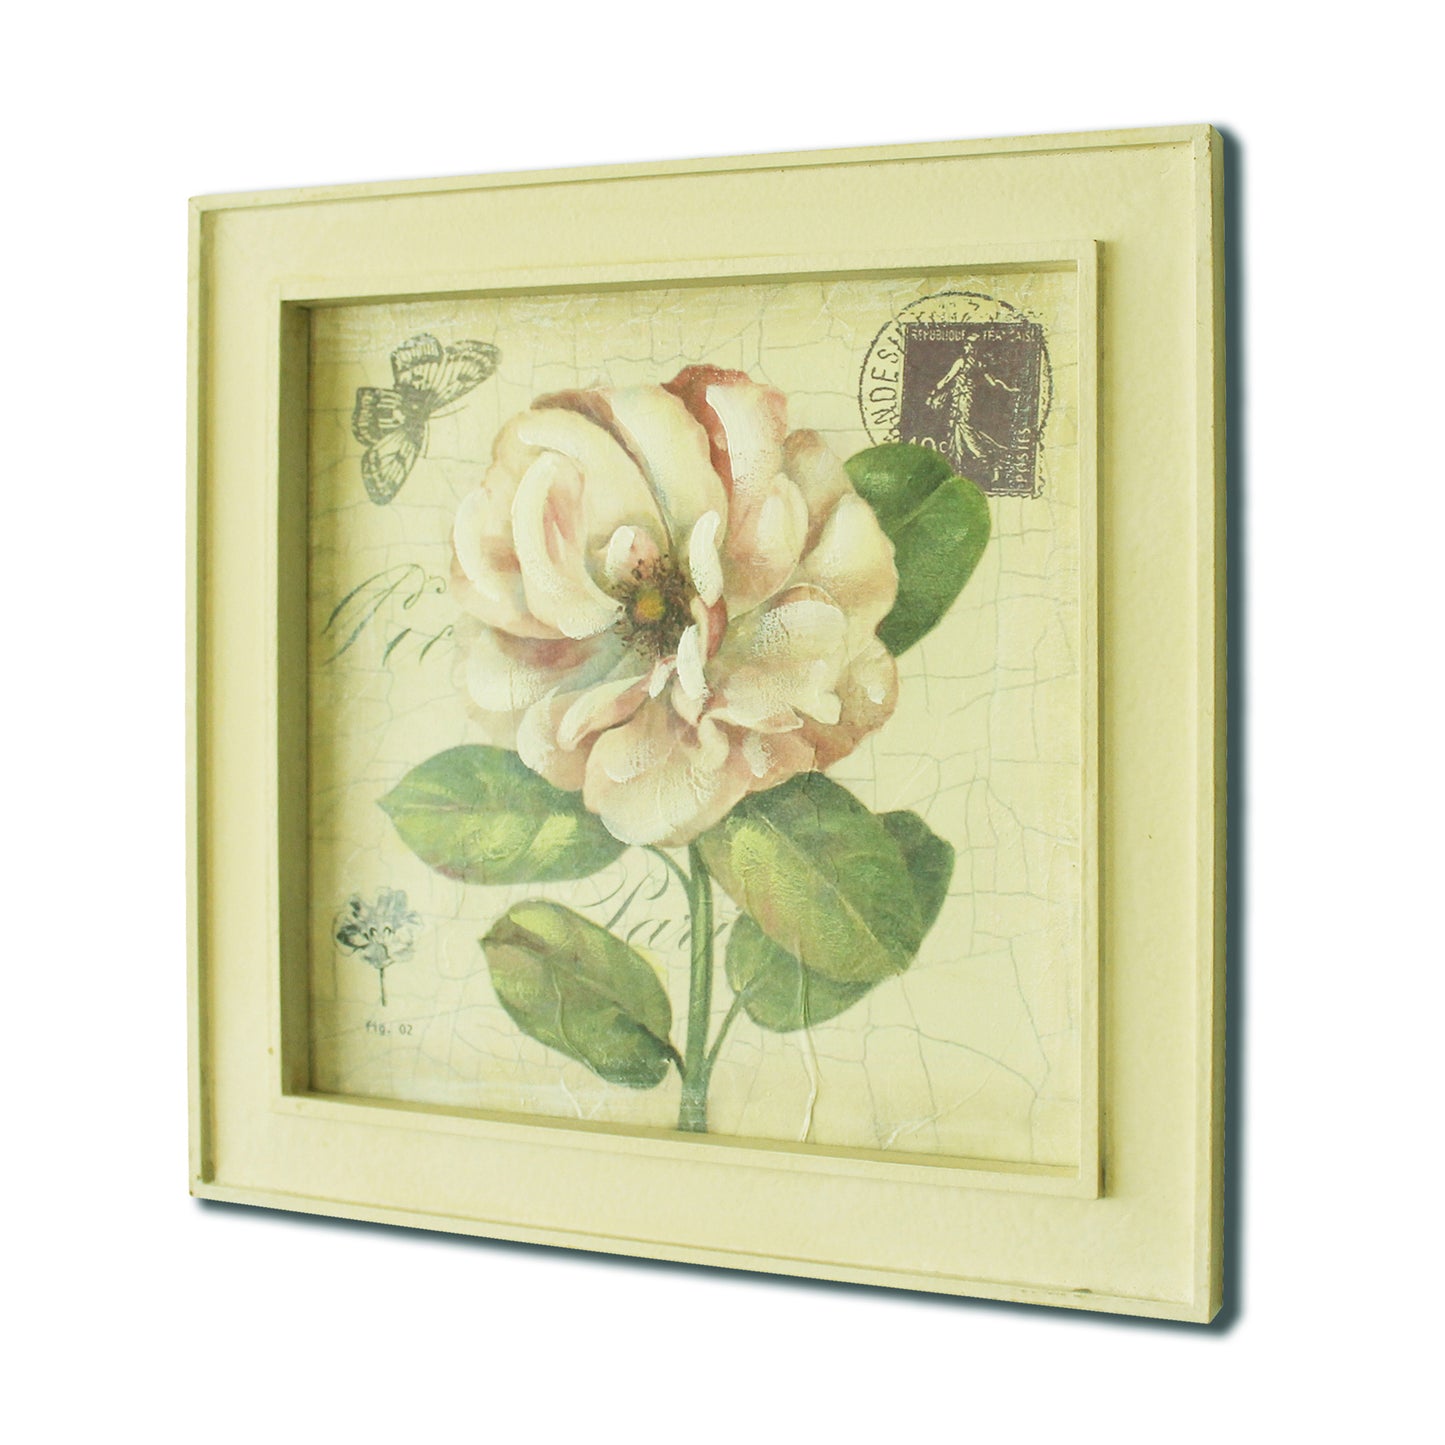 CVHOMEDECO. Rustic Vintage Hand Painted Wood Frame Wall Hanging 3D Painting Decoration Art, Rose Flower Design, 14.25 x 14.25 Inch